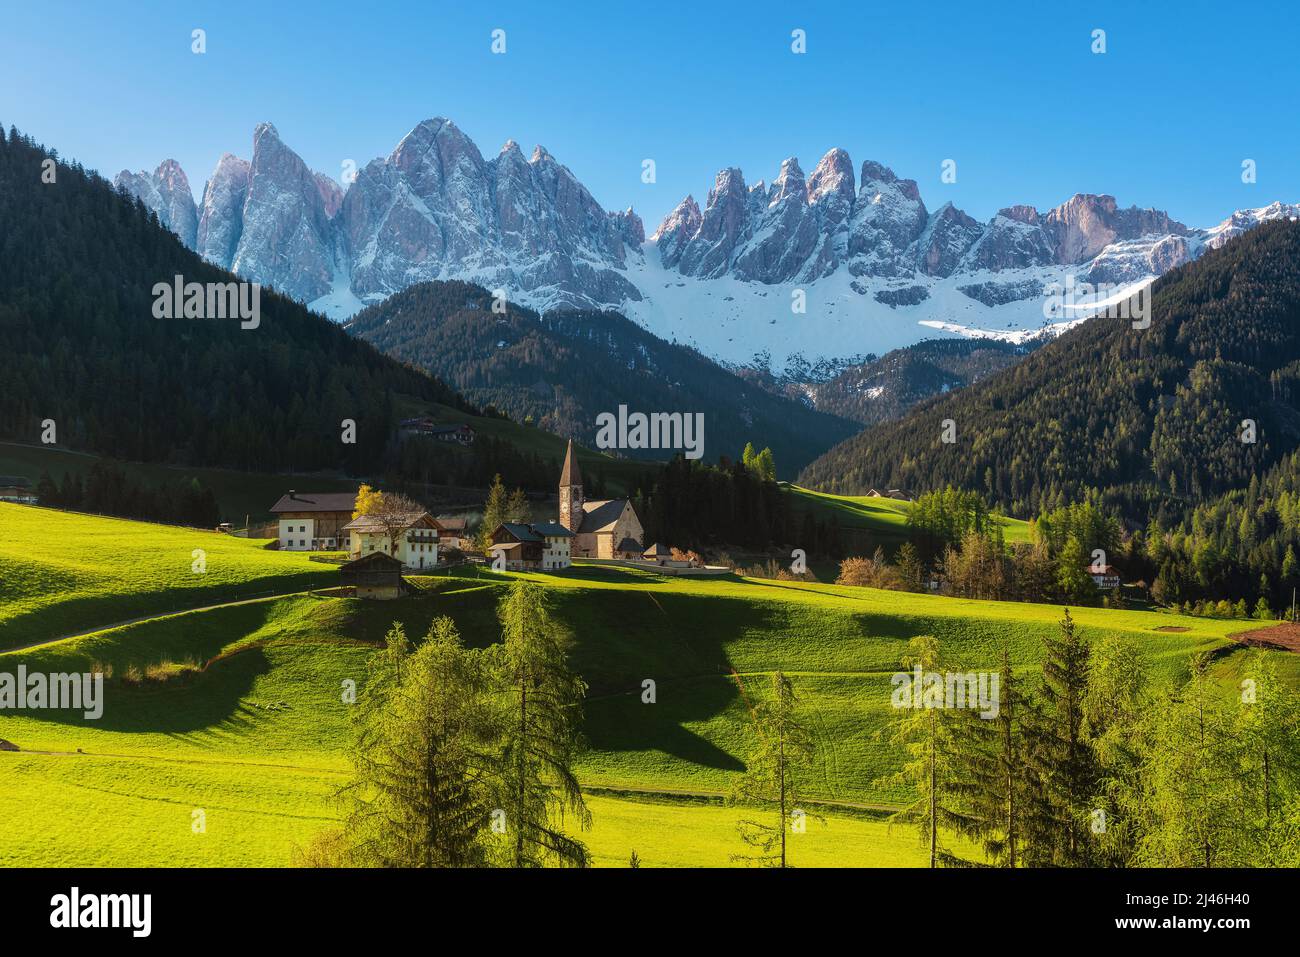 Sunny spring landscape of Dolomites Alps. Famous Santa Maddalena village with church and beautiful Dolomiti mountains, Val Di Funes, Dolomites, Italy Stock Photo